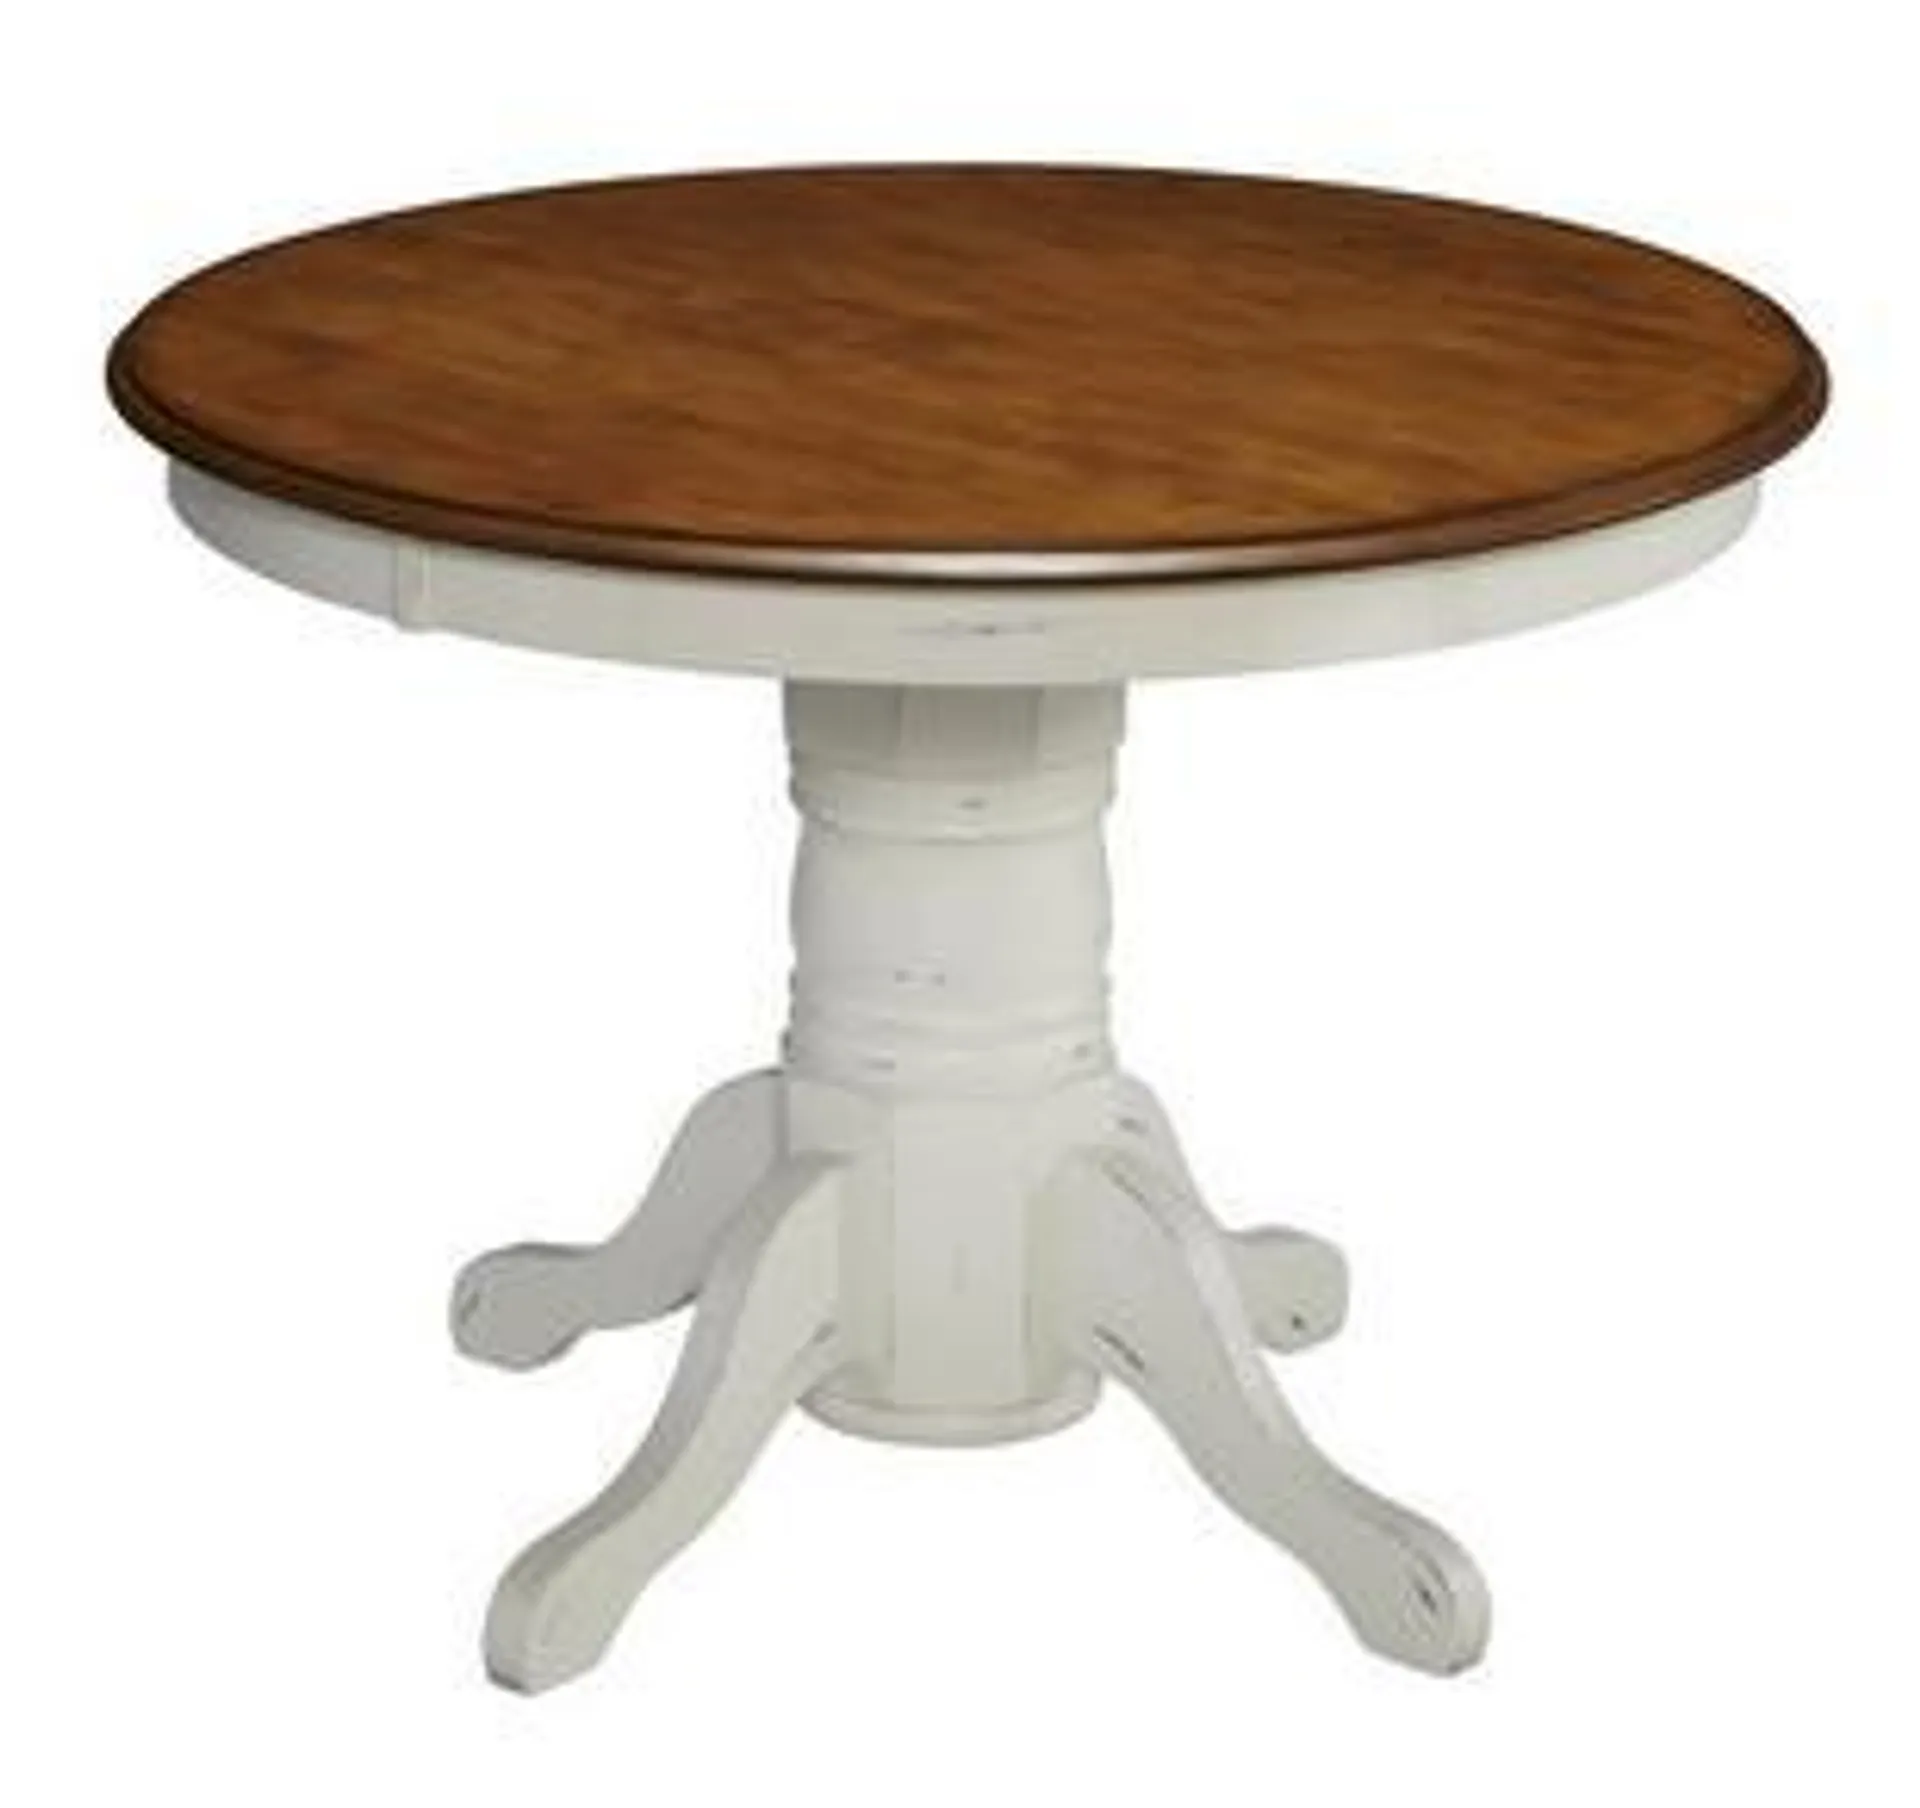 French Countryside Round Dining Table - White